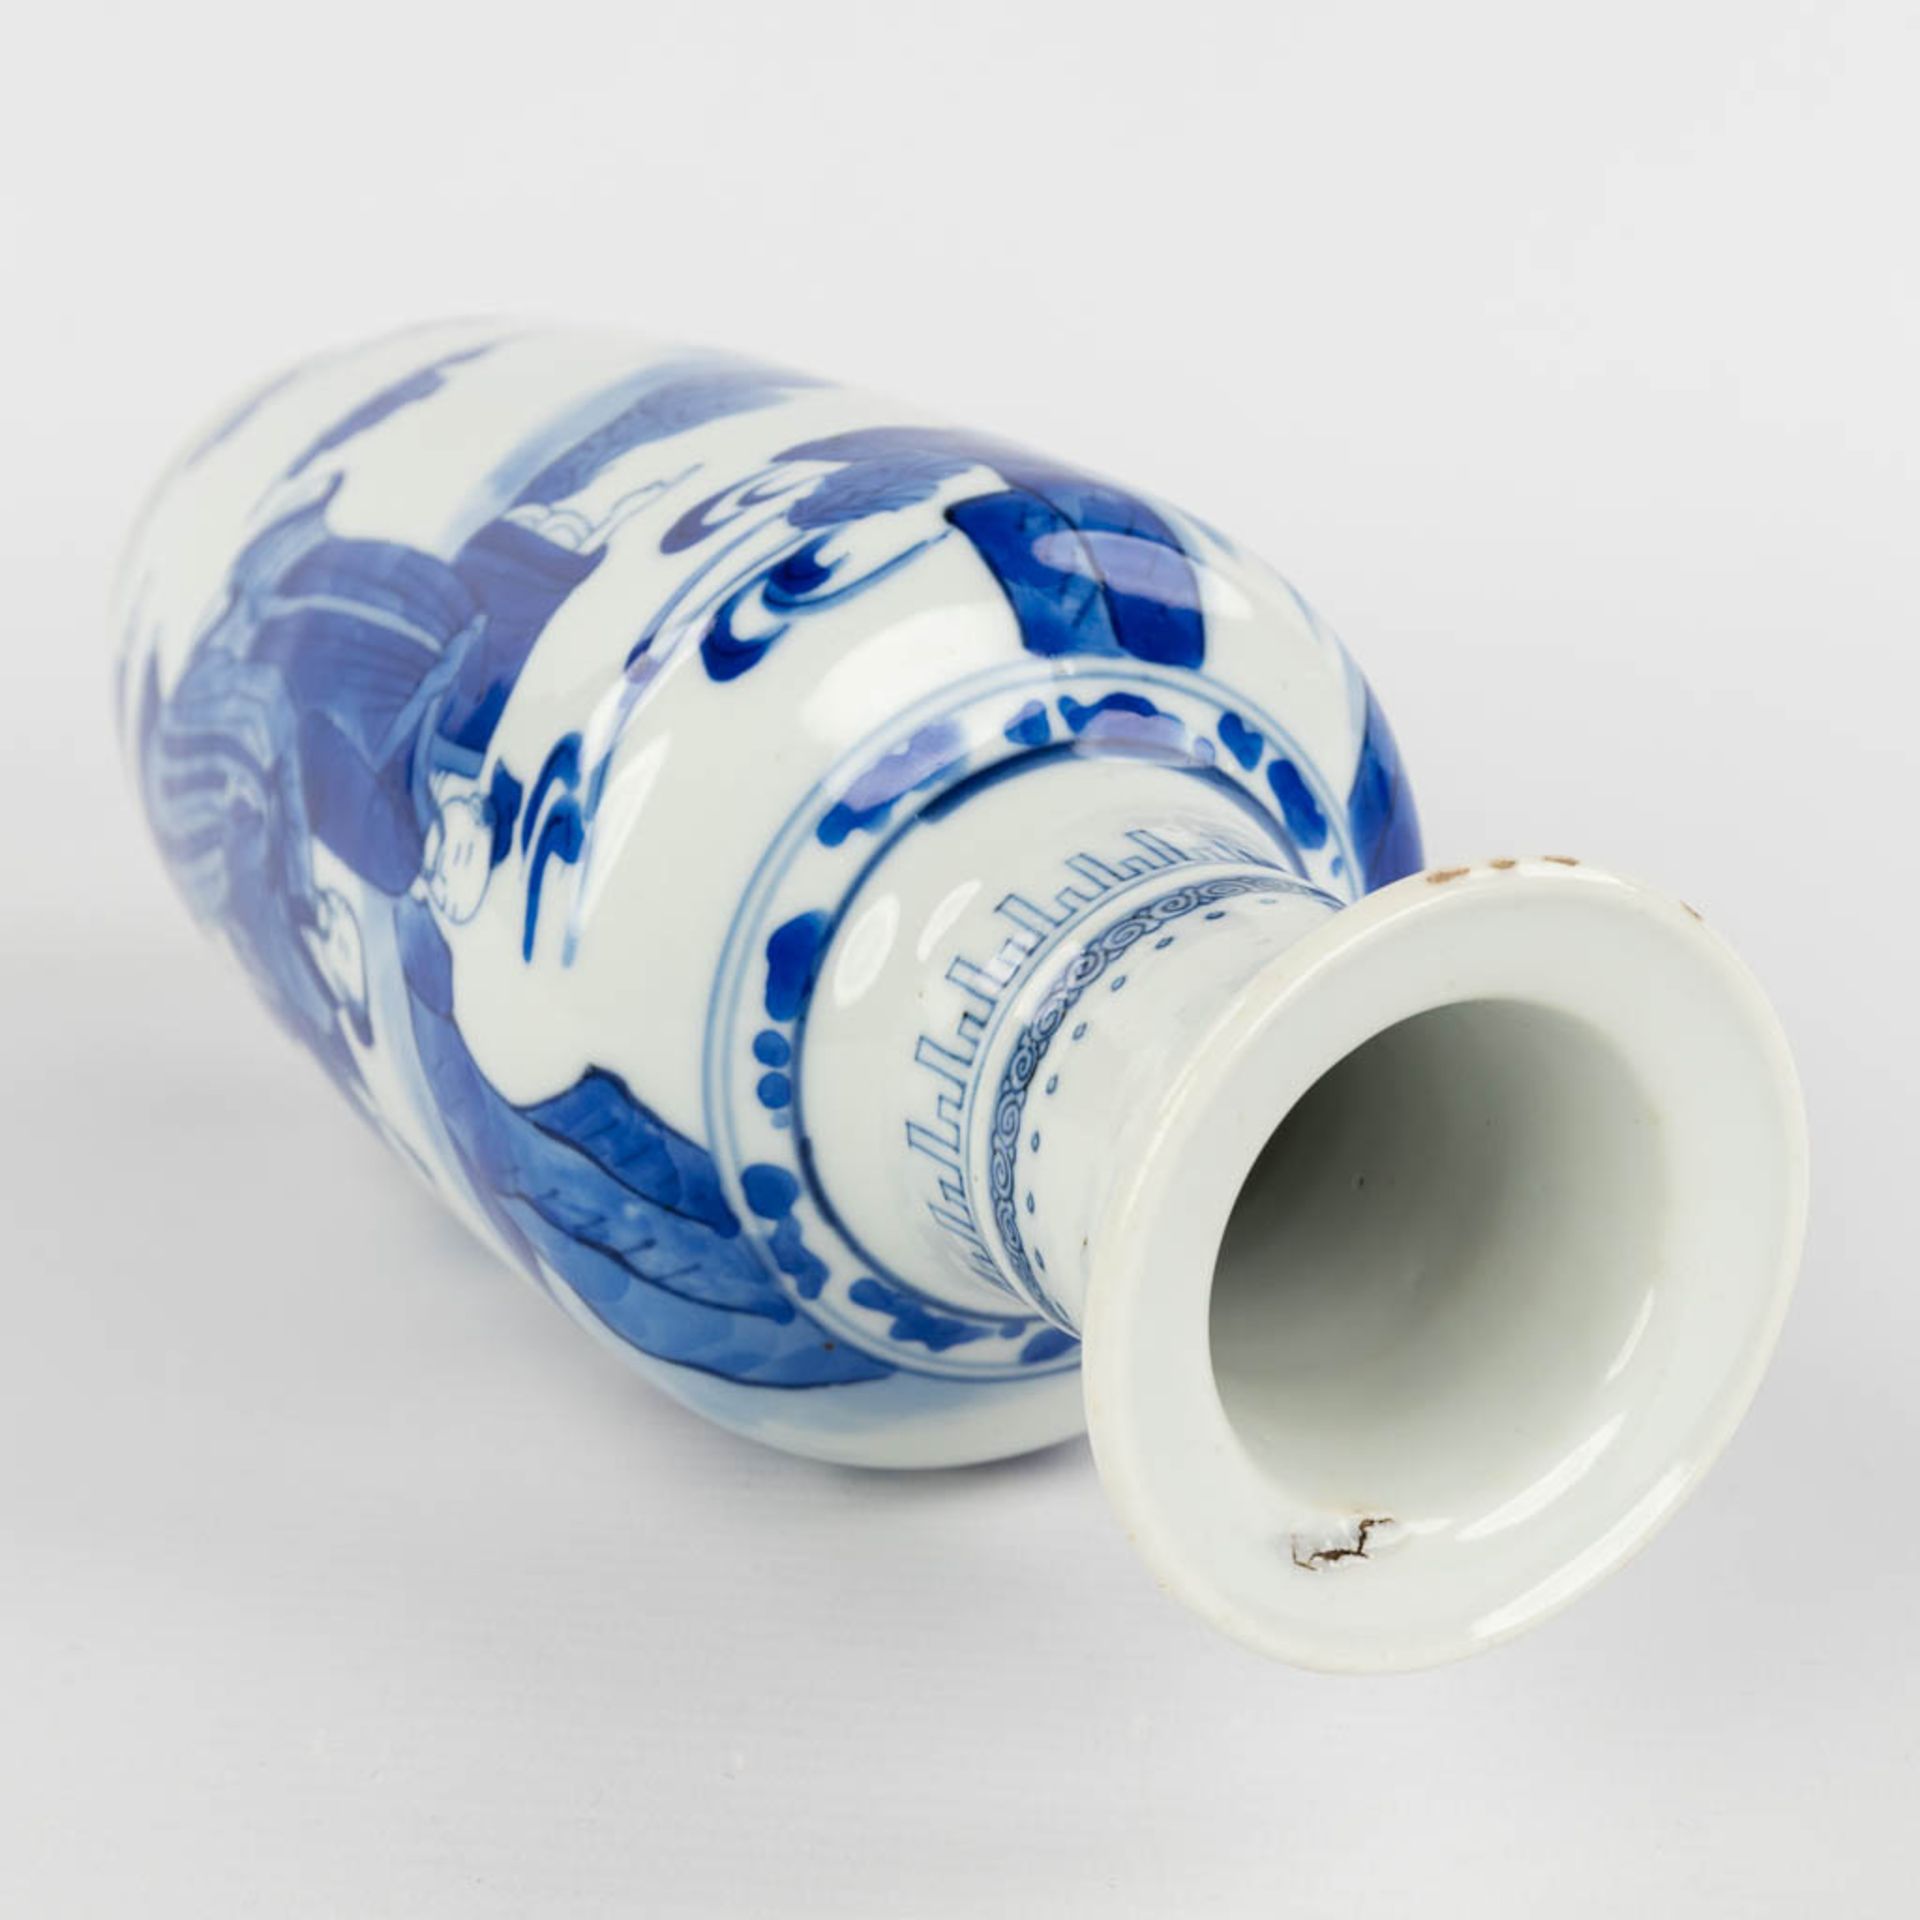 A Chinese vase decorated with blue-white figurines, Kangxi period. 18th C. (H:26 x D:10 cm) - Bild 8 aus 12